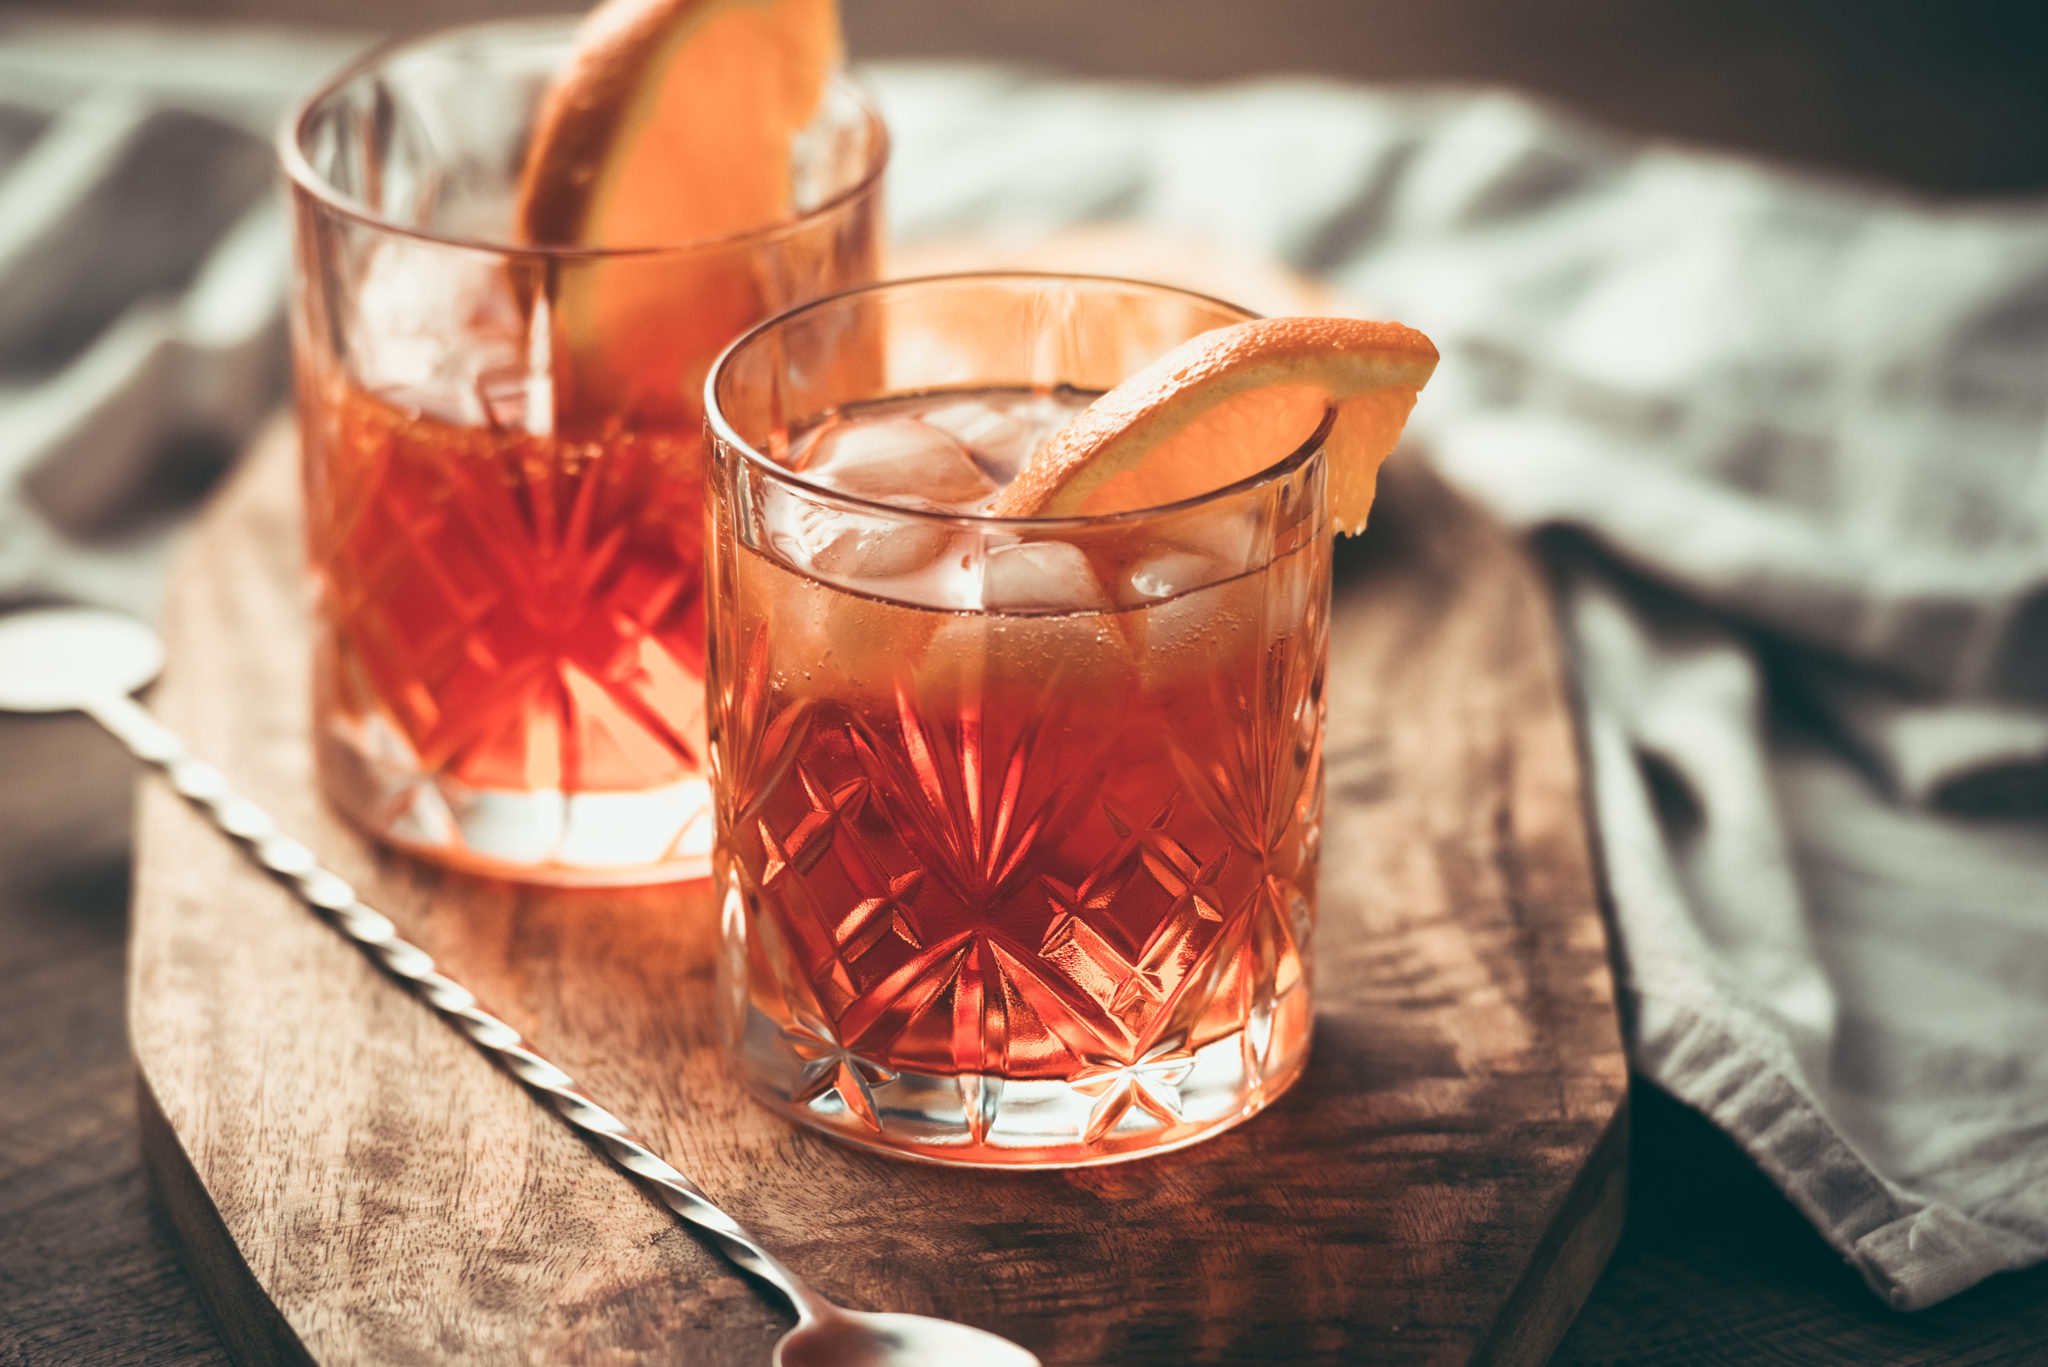 Learn what pairs best with your old fashioned. 